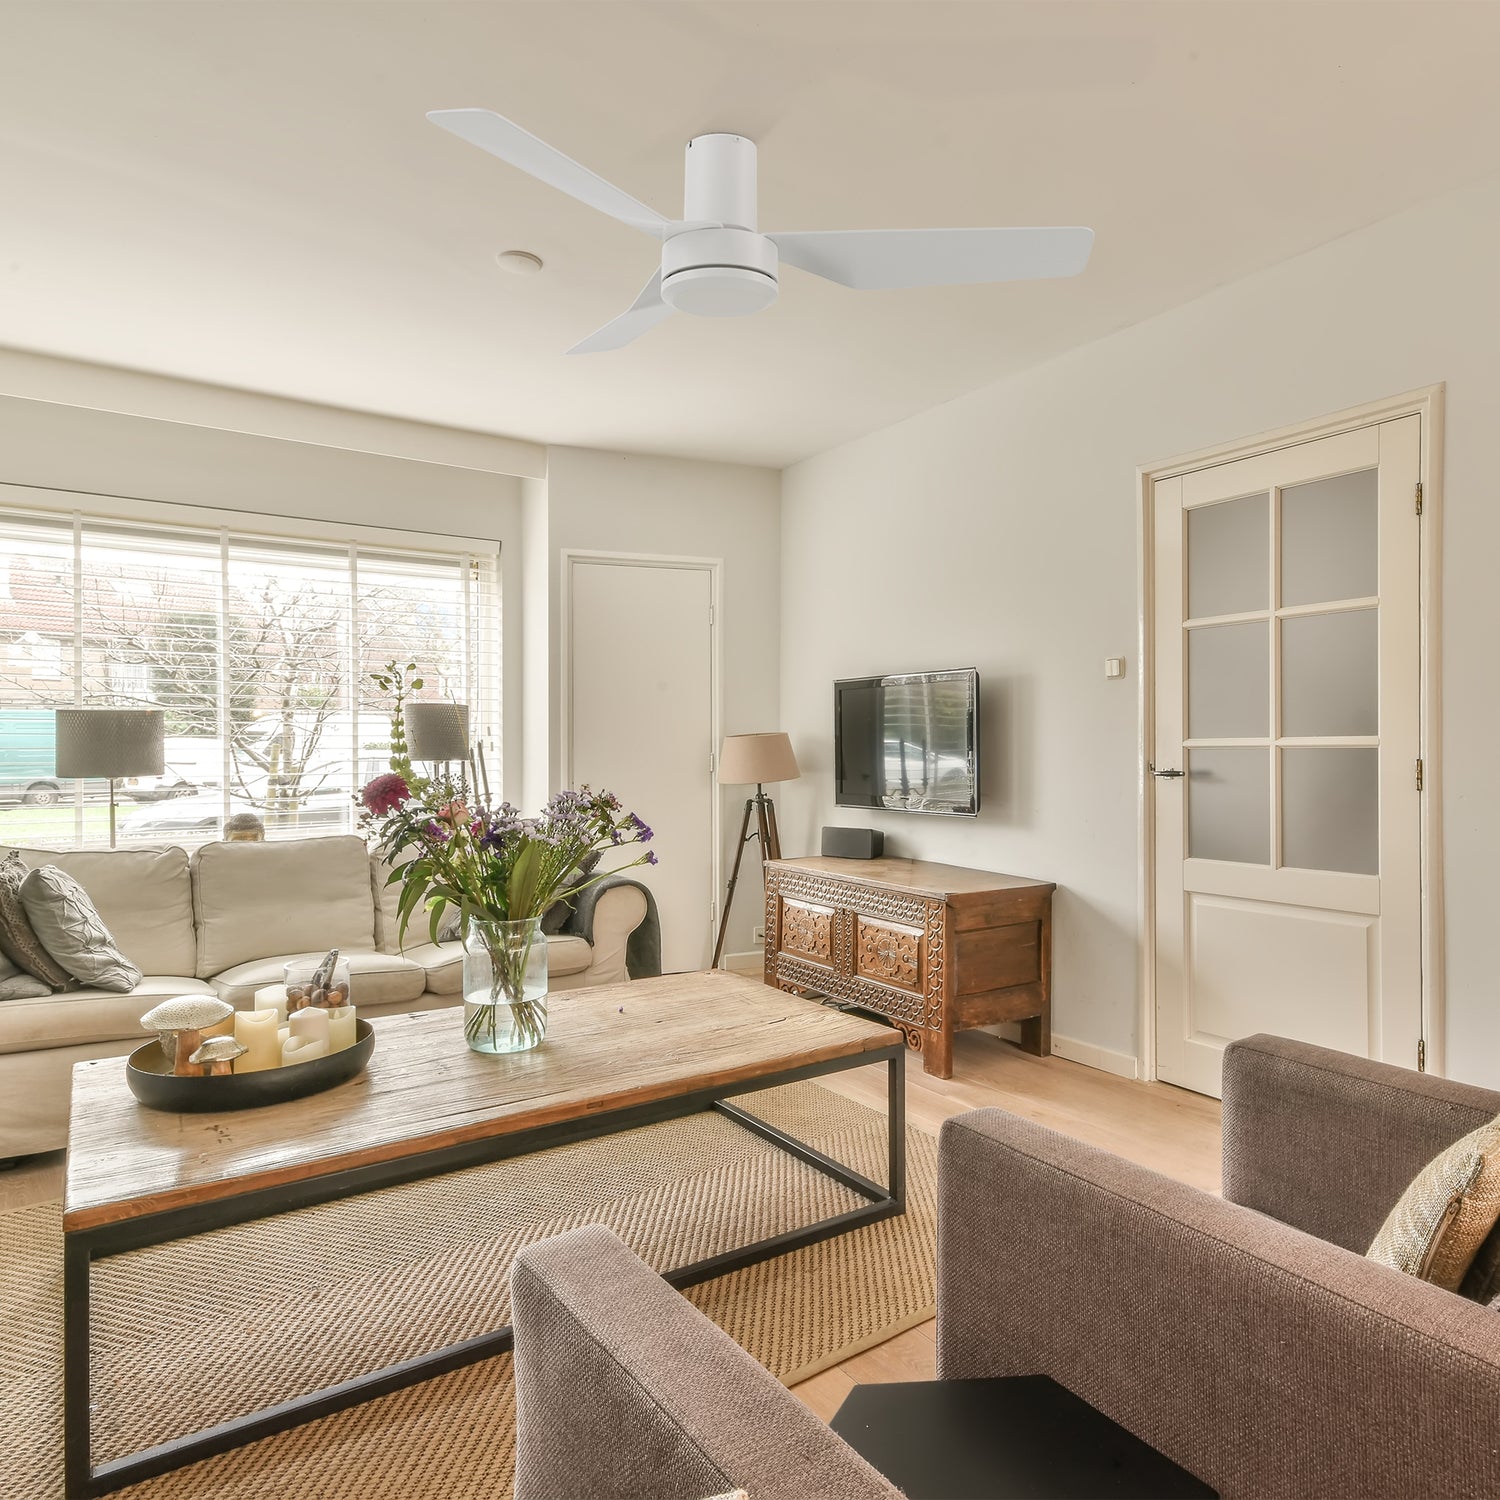 44in Ceiling Fan offers modern elegance for indoor spaces. Reversible DC motor, and large air volume for a cozy ambiance. 